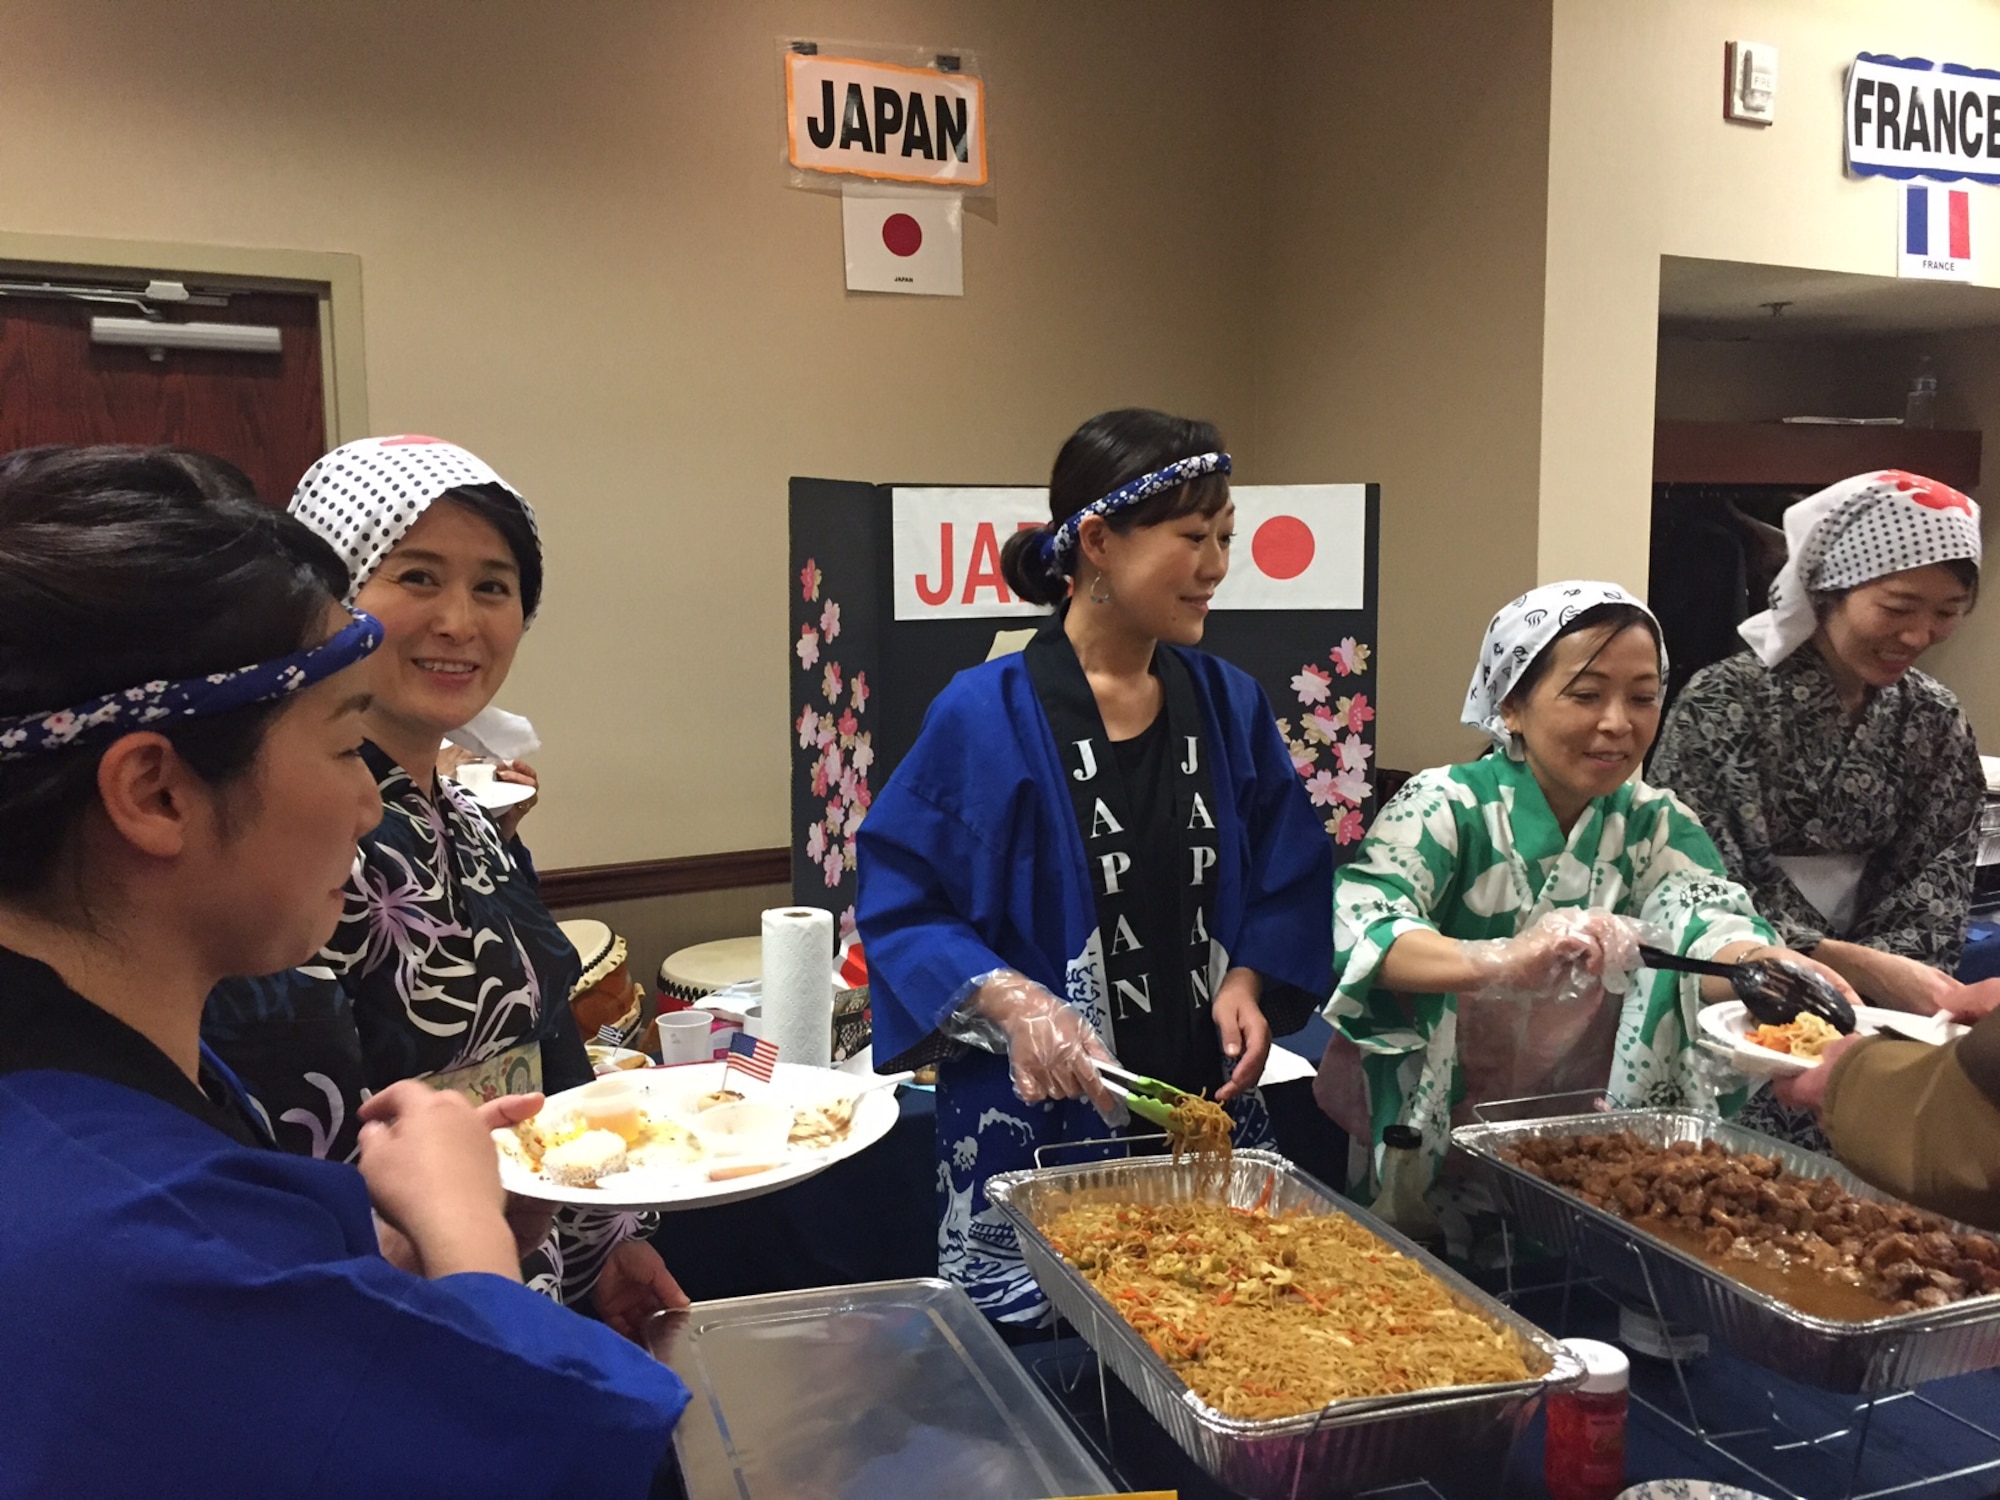 The cultures of many countries, including Japan, mingled at last year’s International Fair, organized by the International Spouses’ Group of Wright-Patterson Air Force Base, at the Holiday Inn in Fairborn. This year’s fair will return to the Holiday Inn April 16. (Skywrighter photo/Amy Rollins)